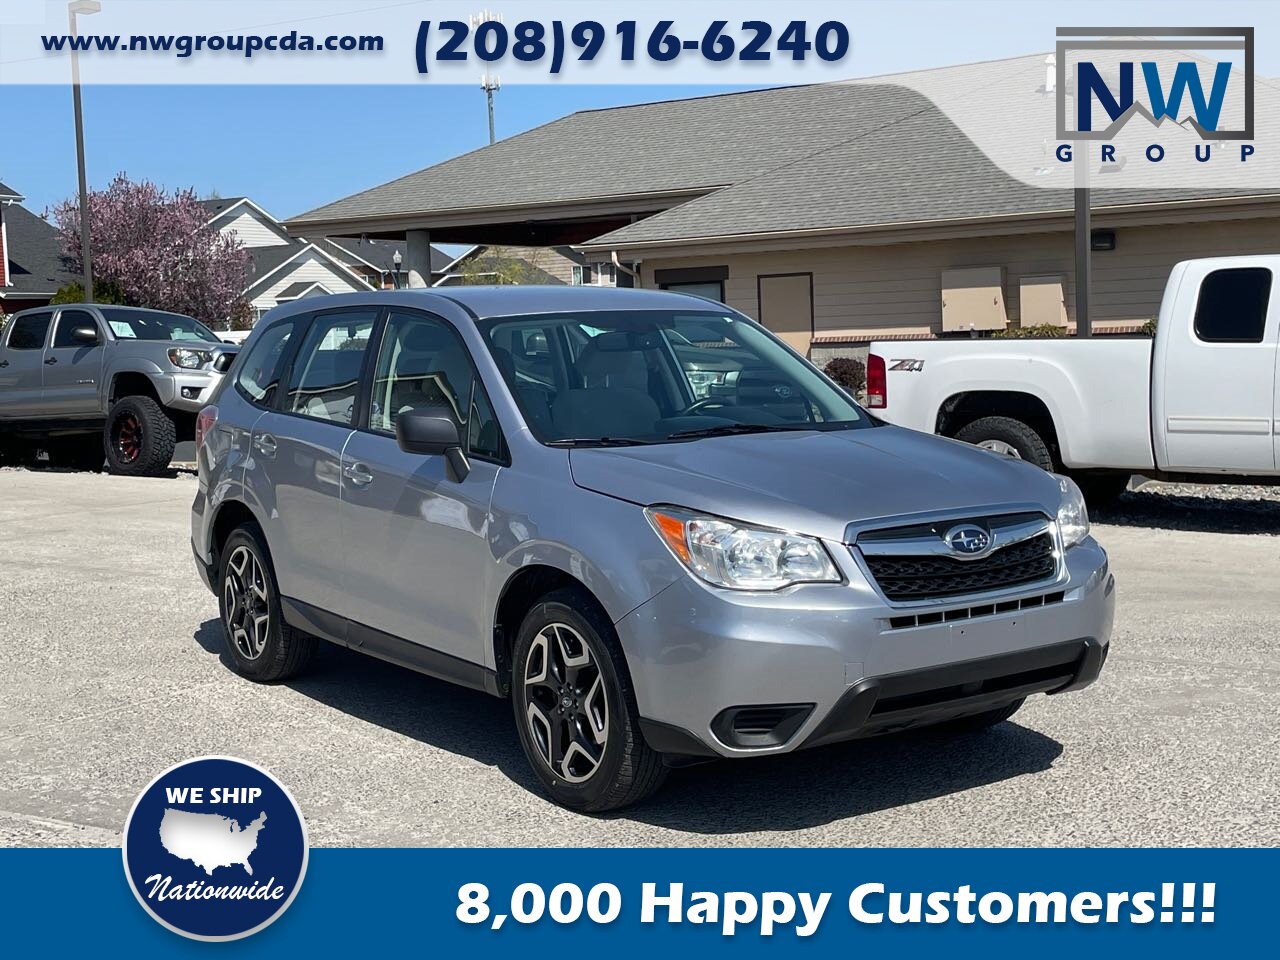 2014 Subaru Forester 2.5i.  6 speed manual! Very Clean! Low miles! Rare! - Photo 1 - Post Falls, ID 83854